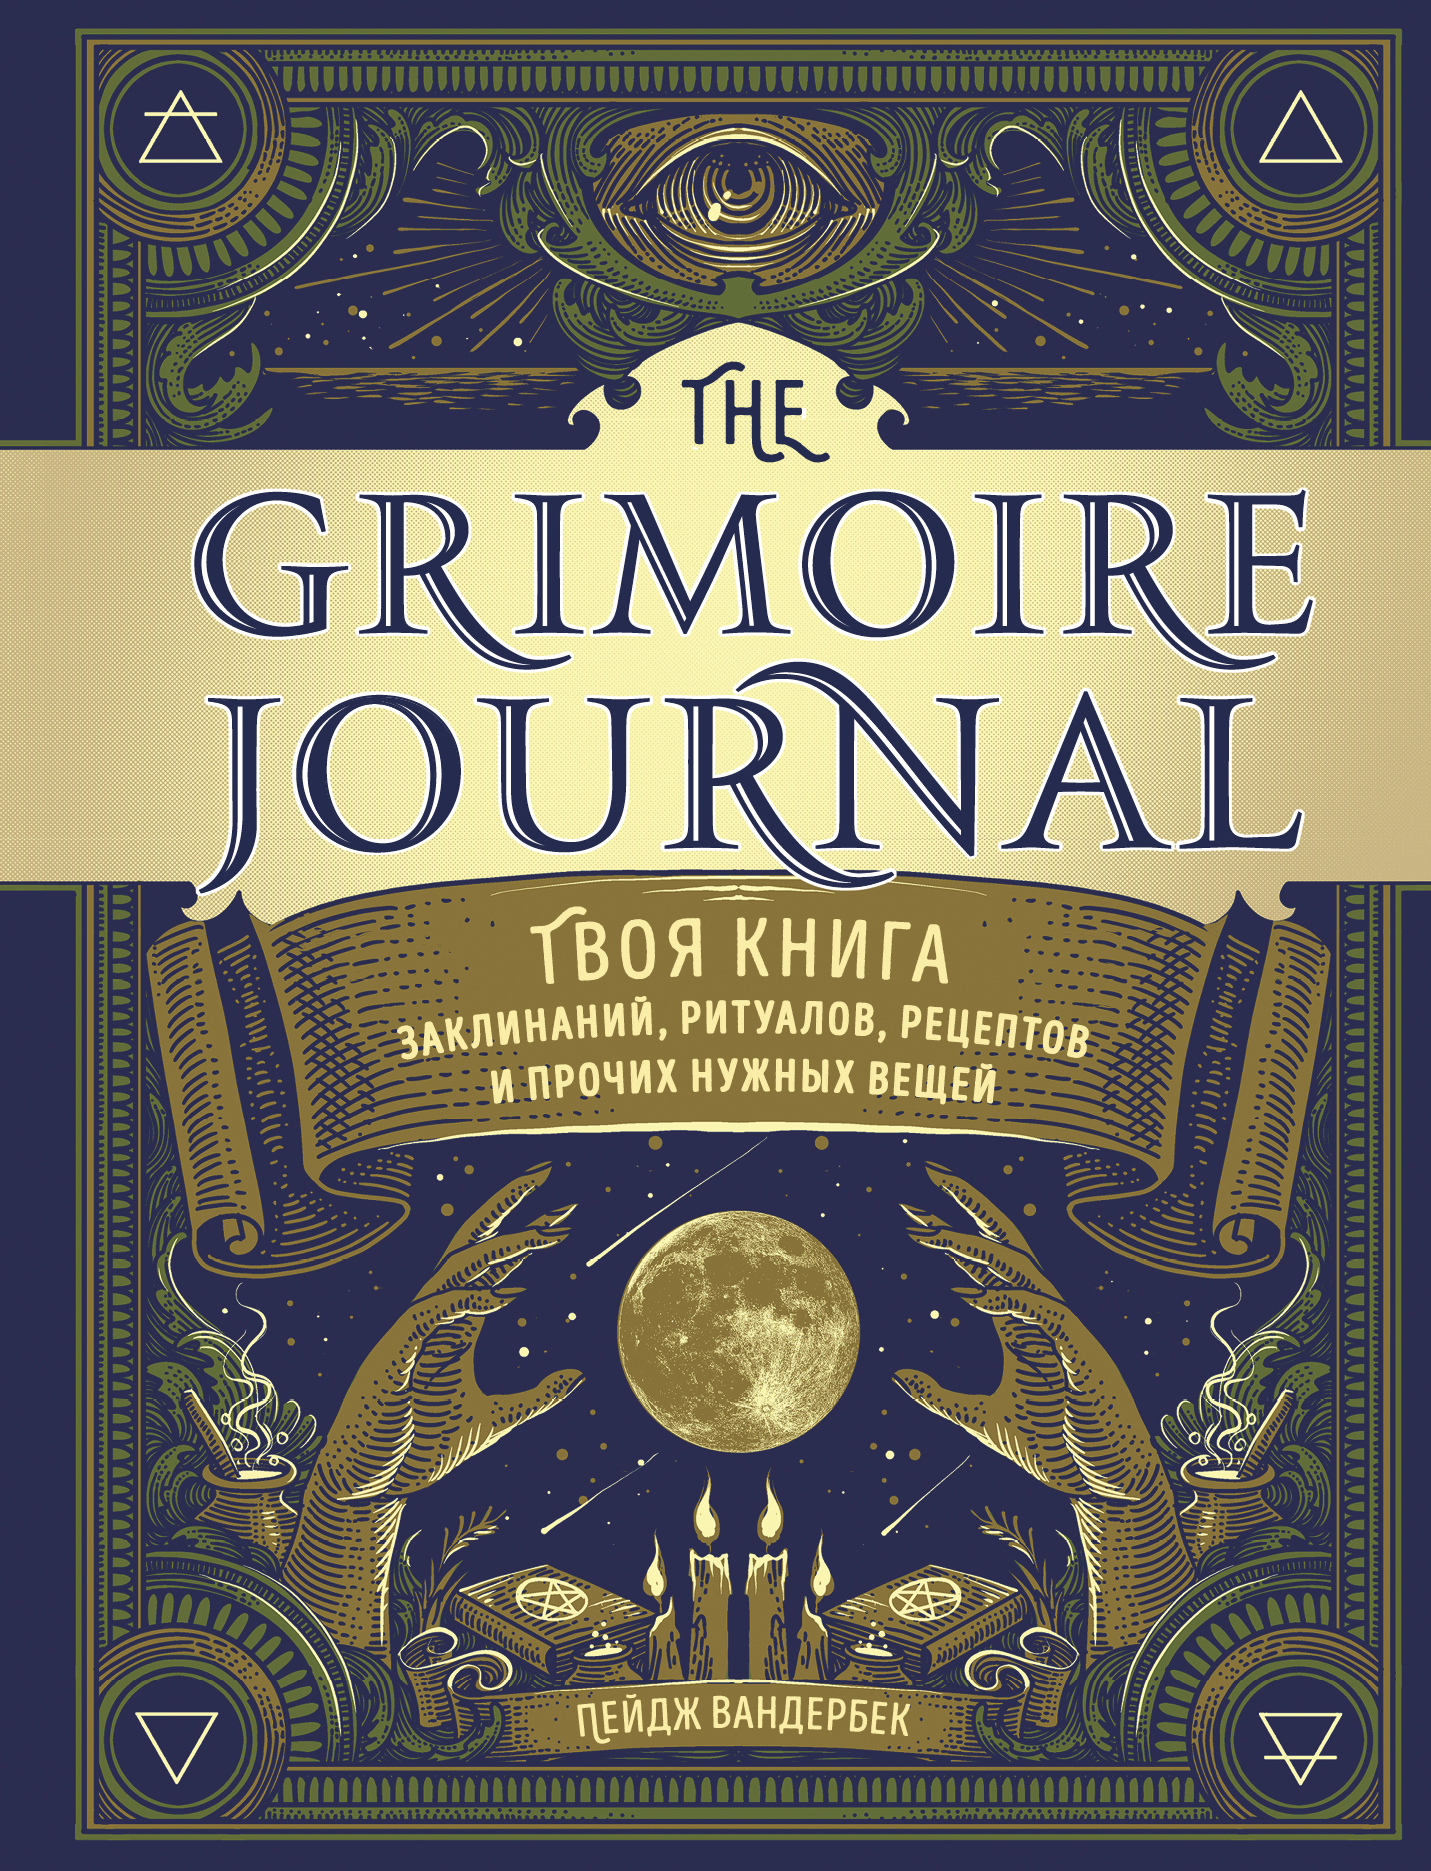  . The Grimoire Journal.   , ,      